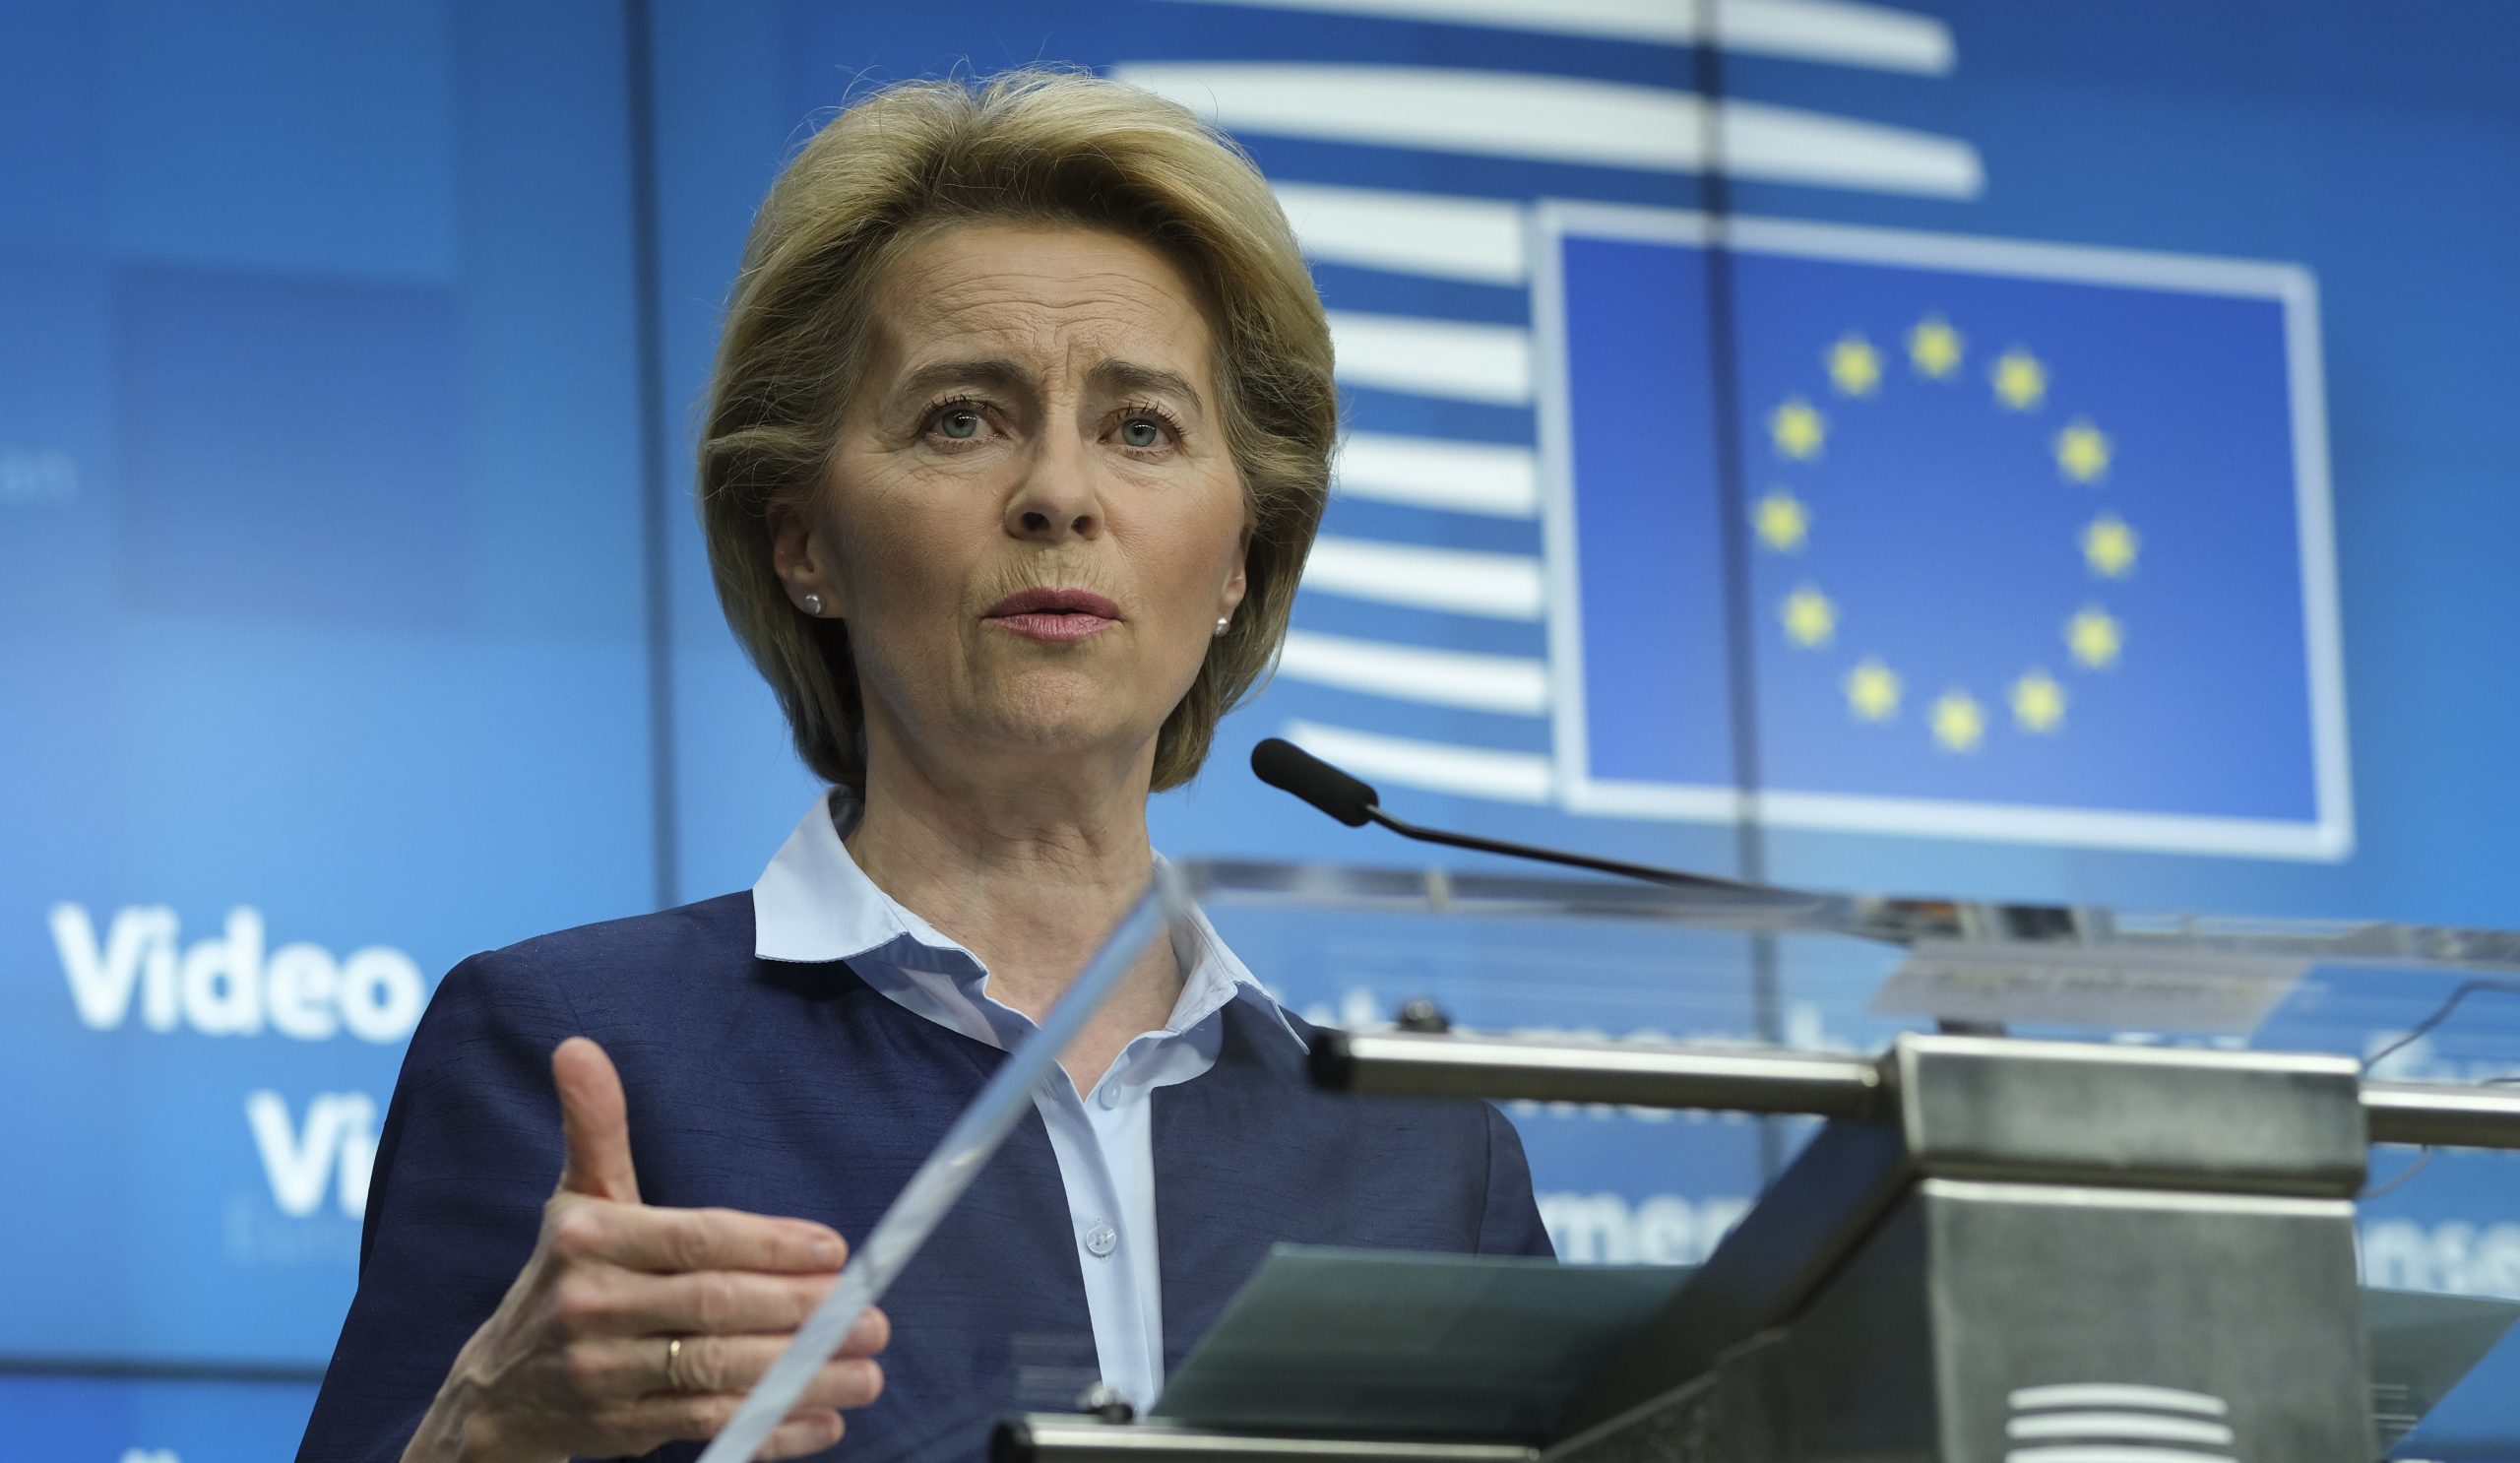 epa08380373 European Commission President Ursula Von Der Leyen speaks during a news conference after a video conferenced EU summit with  European heads of state and governments to discuss measures related to the COVID-19 disease, in Brussels, Belgium, 23 April 2020.  EPA/OLIVIER HOSLET / POOL